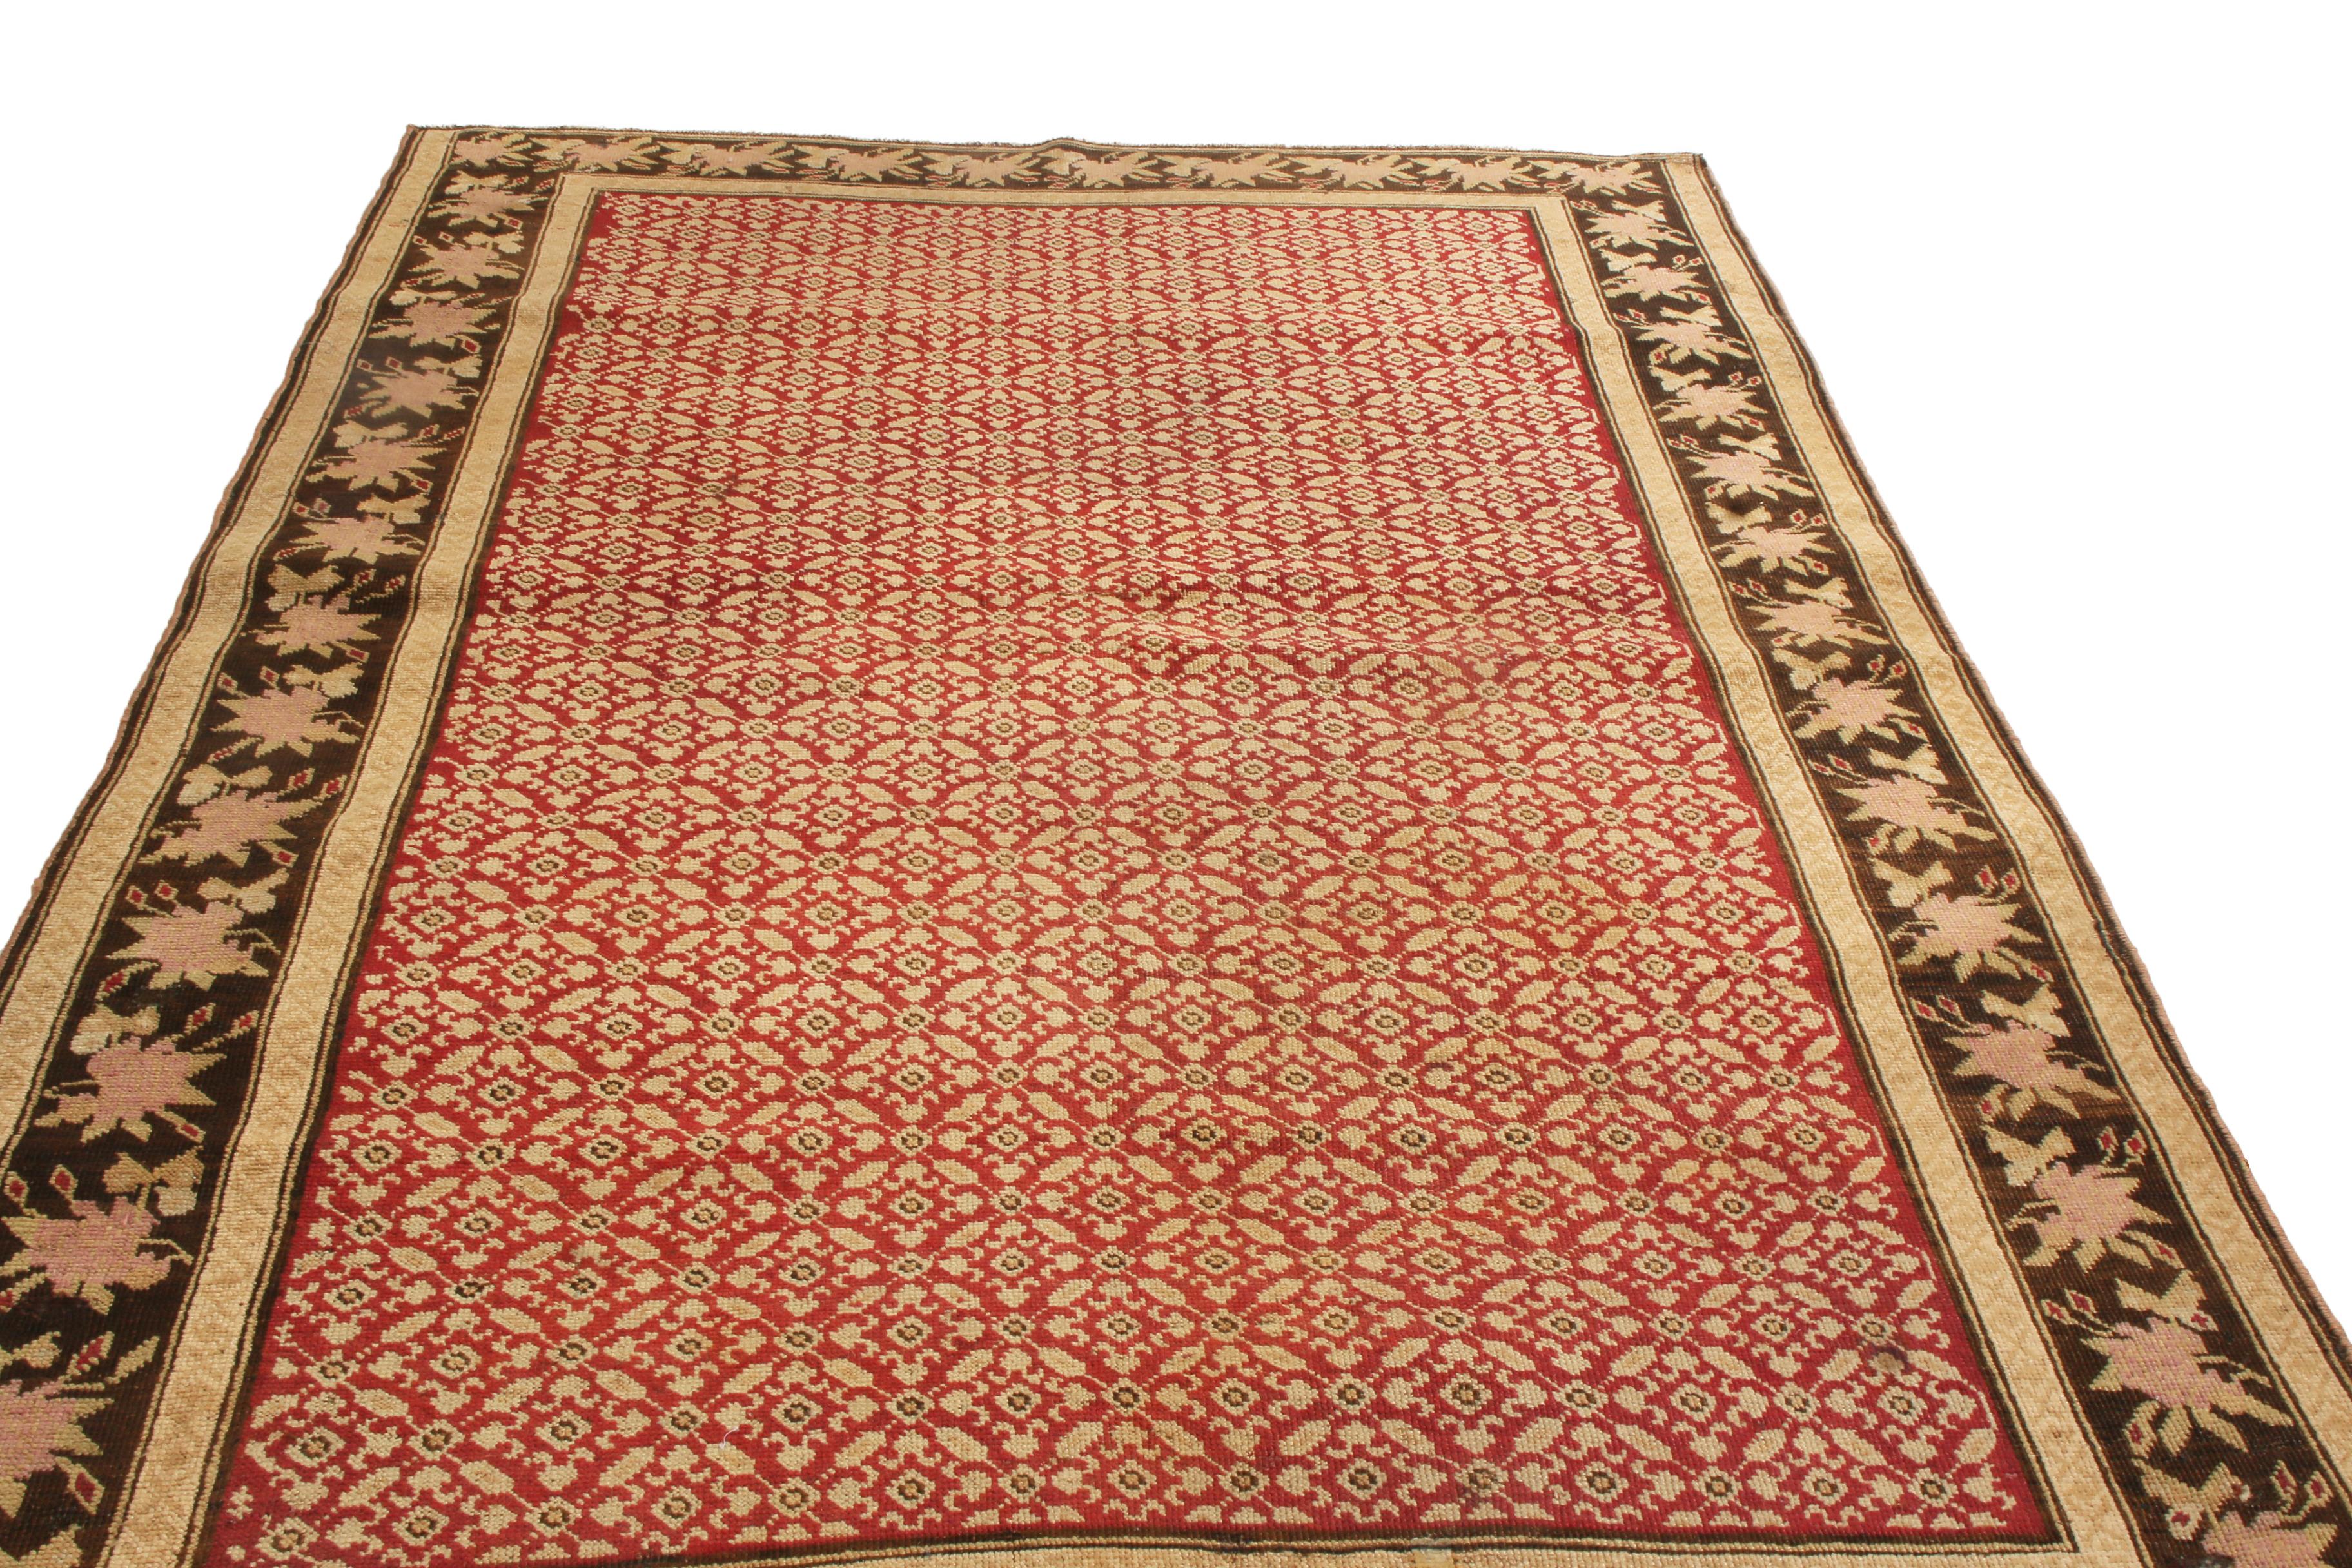 Originating from Russia in 1900, this antique traditional Karabagh wool rug employs a focused, ornate colorway combination with a lesser-known variation of the Herati pattern. Sometimes referred to as the fish pattern, the repetitious all-over field